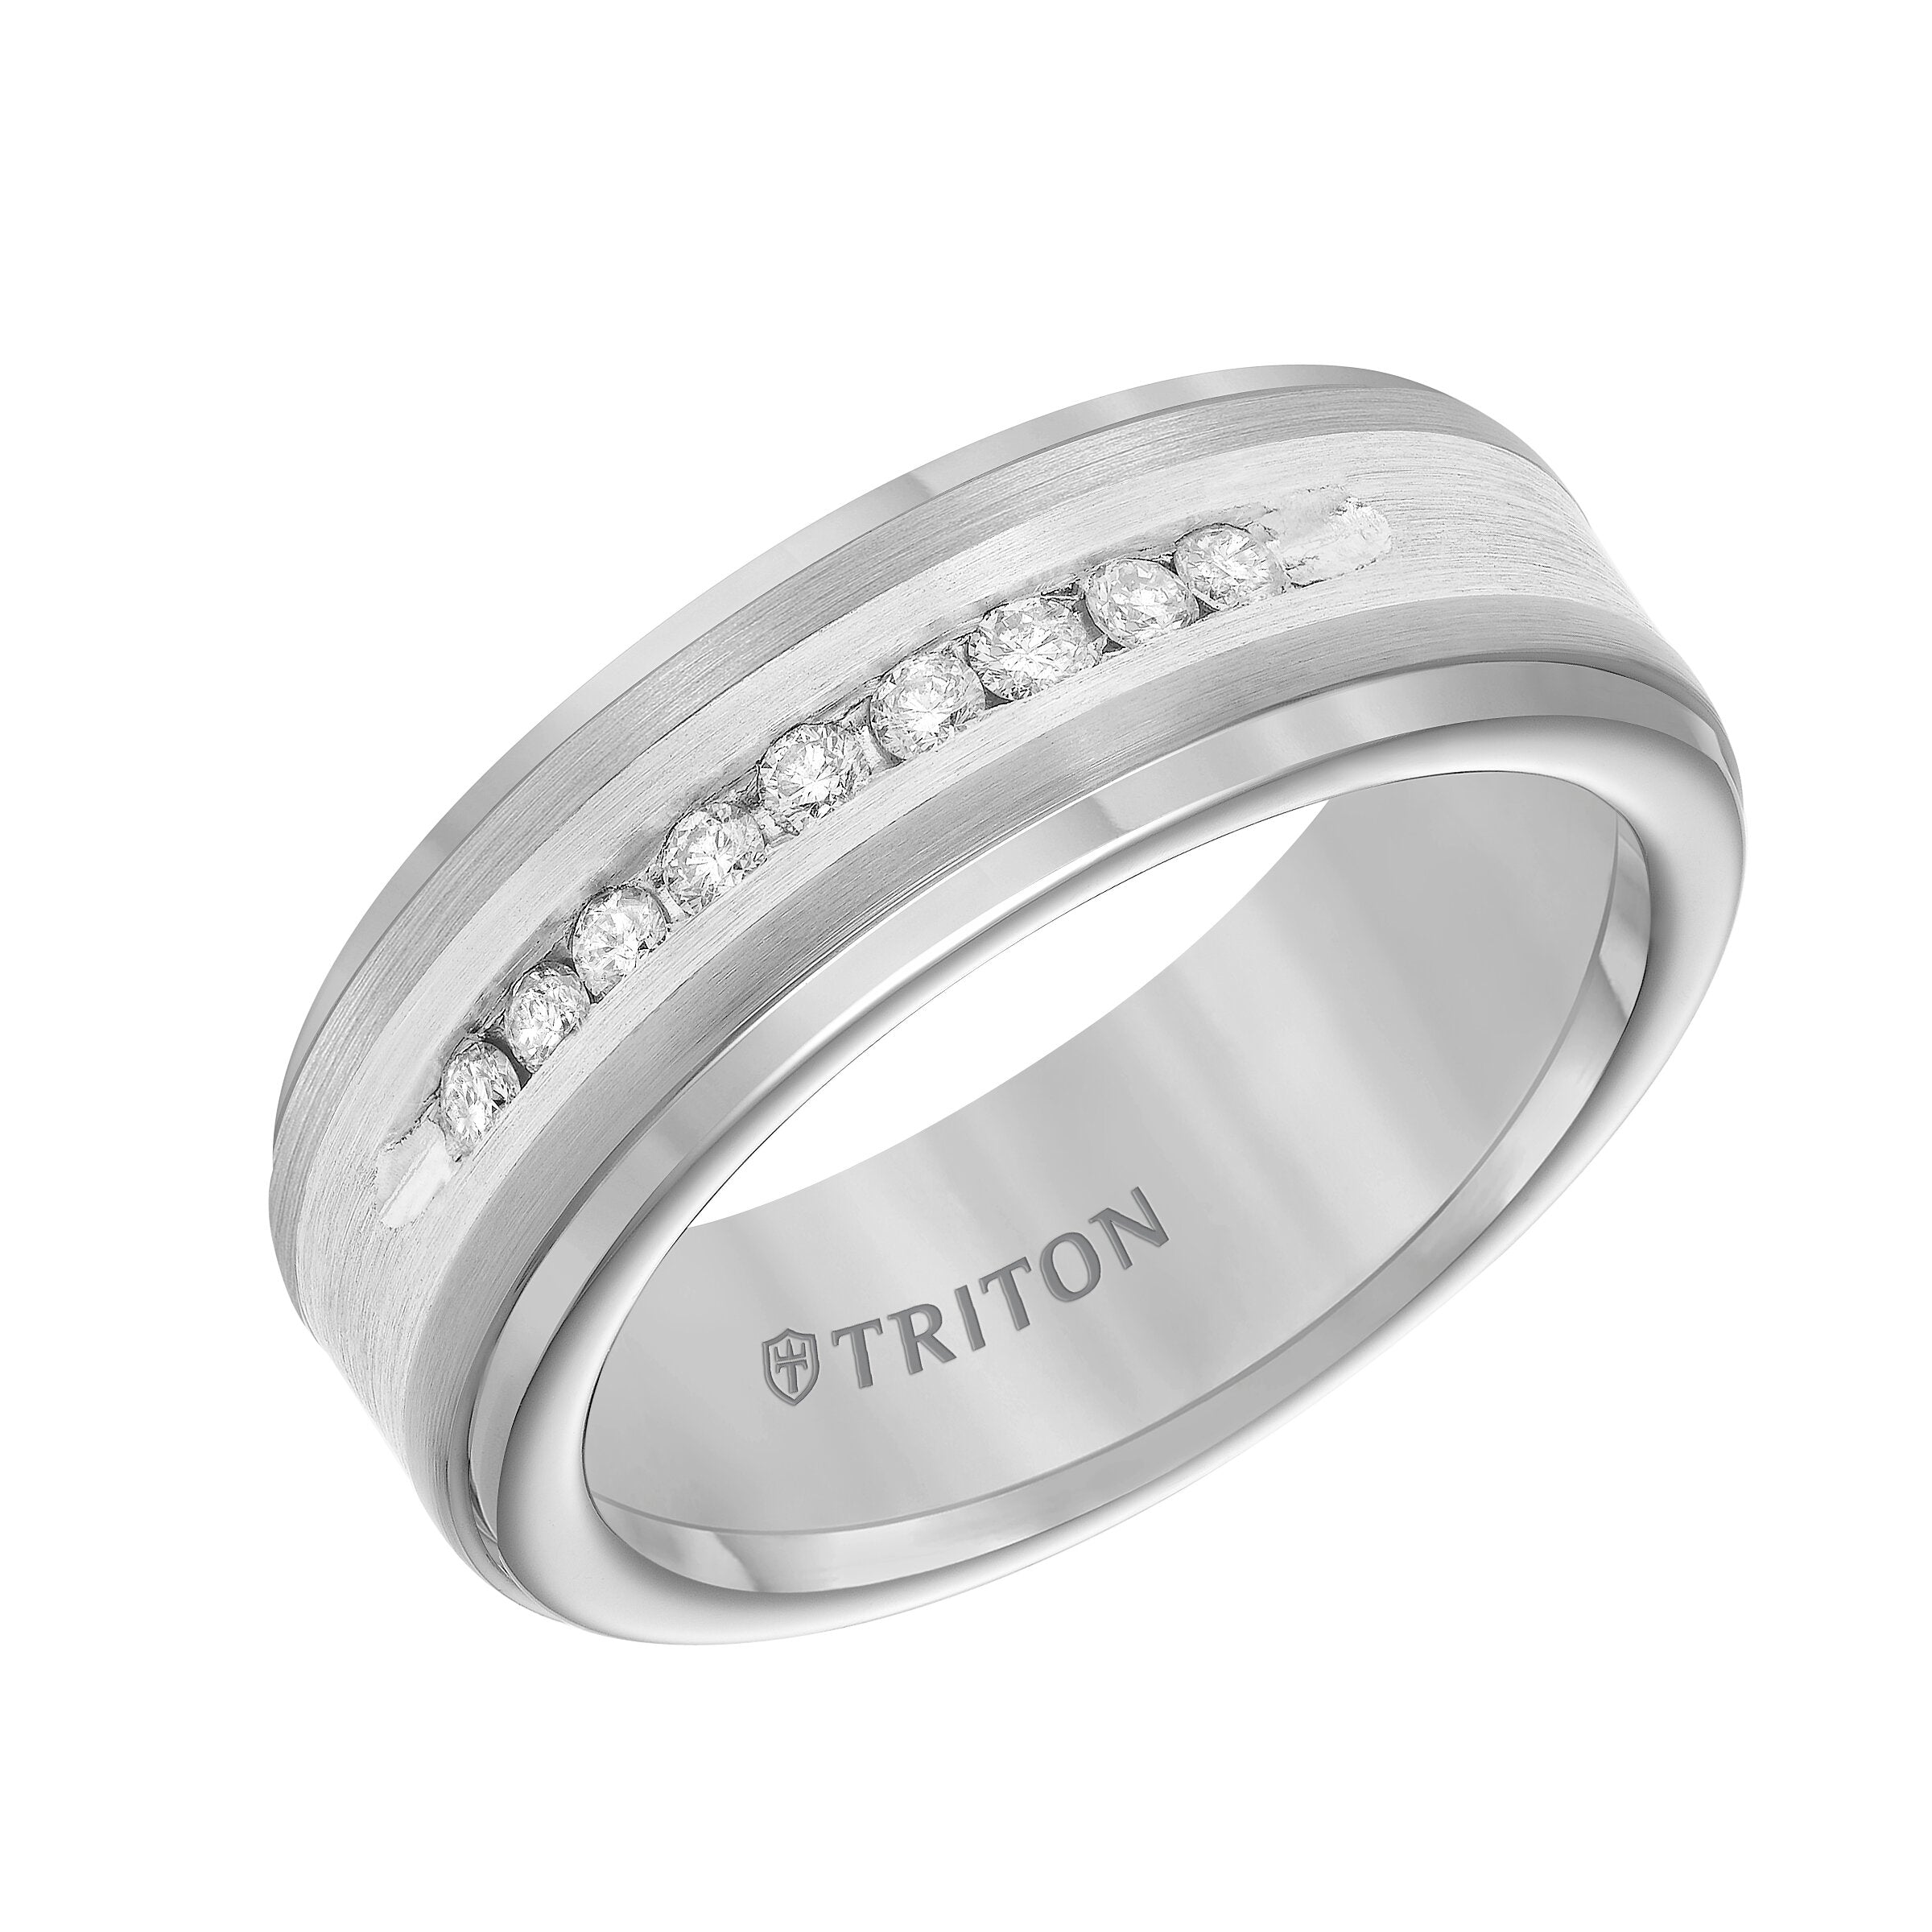 8MM White Tungsten Diamond Ring - Channel Set Silver Satin Finish and Step Edge